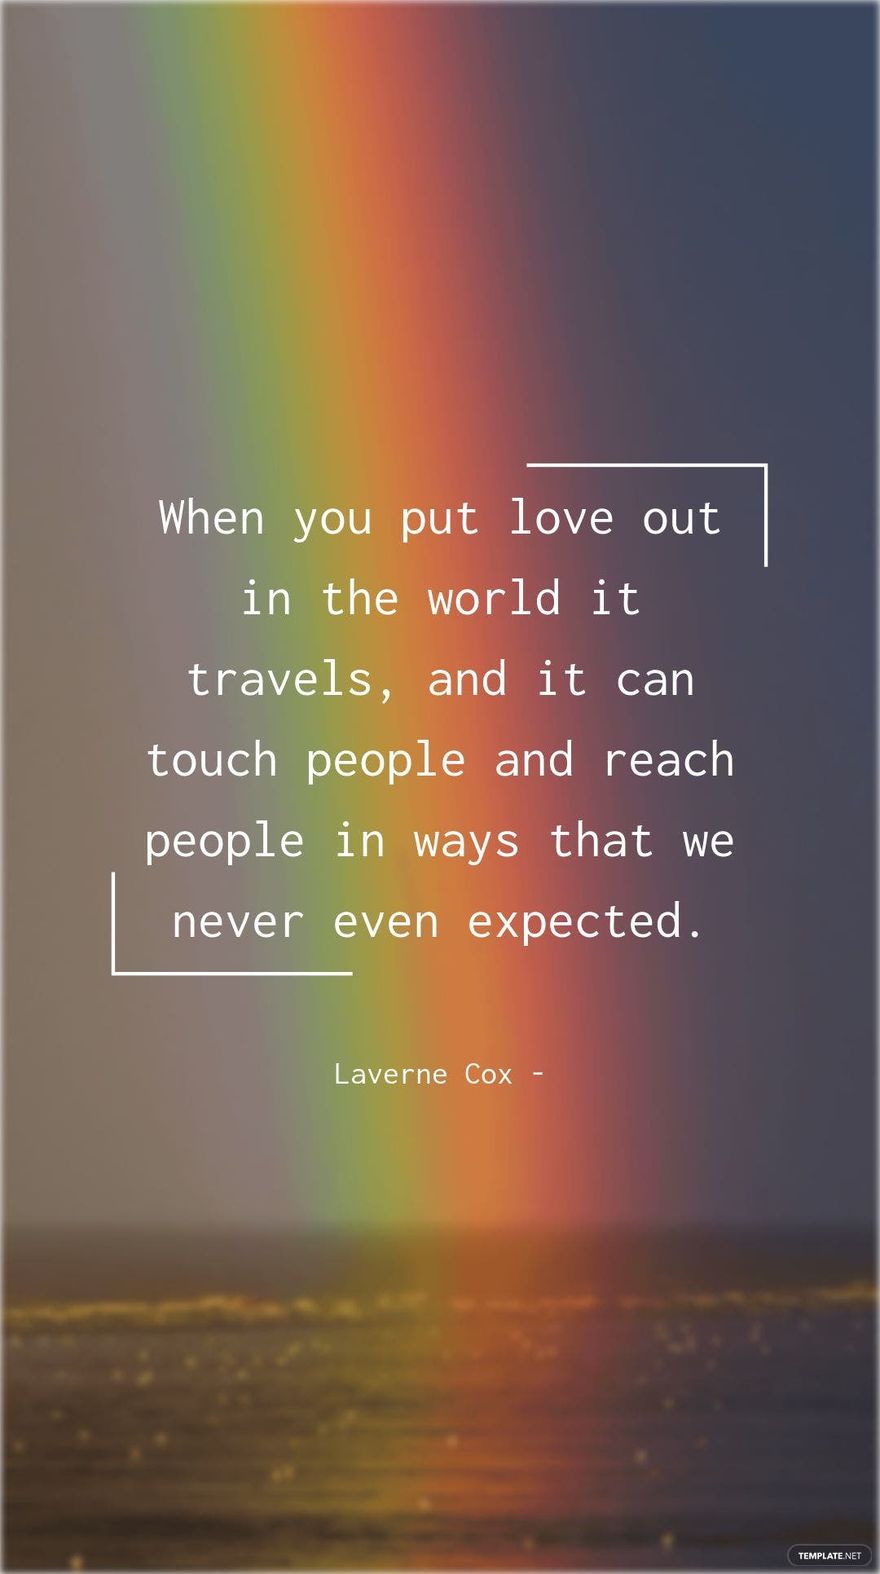 Laverne Cox - When you put love out in the world it travels, and it can touch people and reach people in ways that we never even expected.